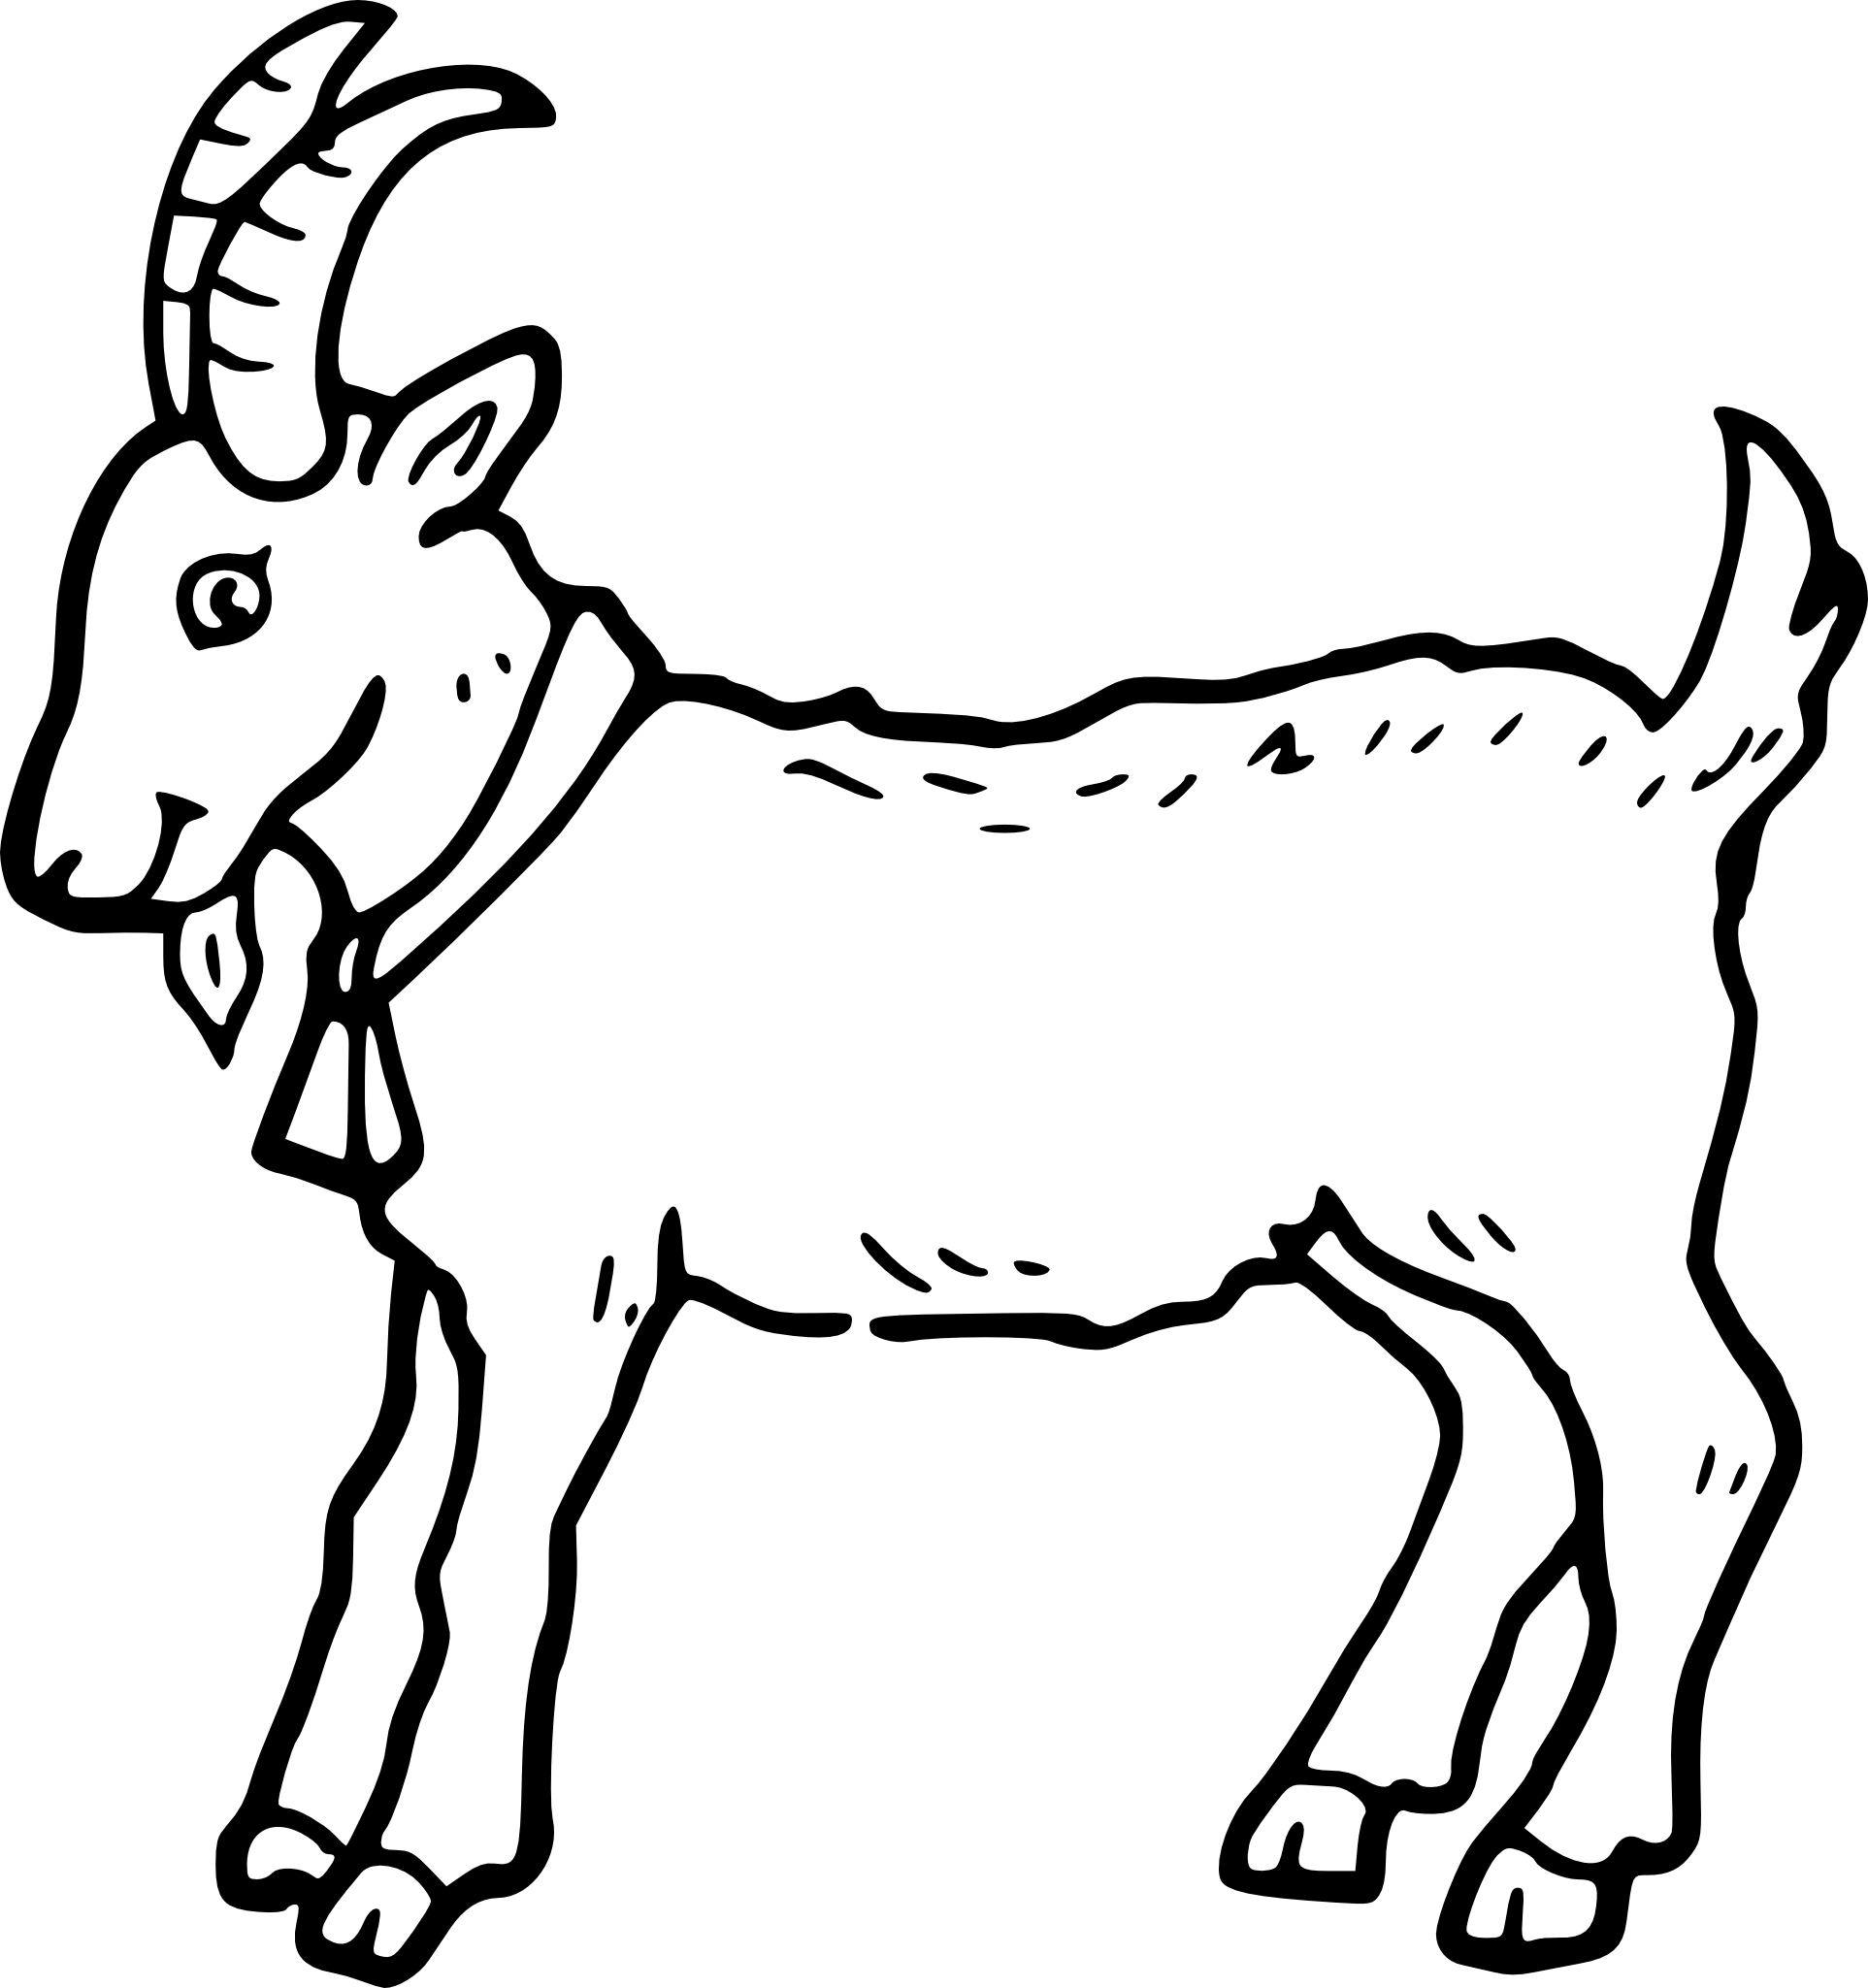 Goat drawing and coloring page